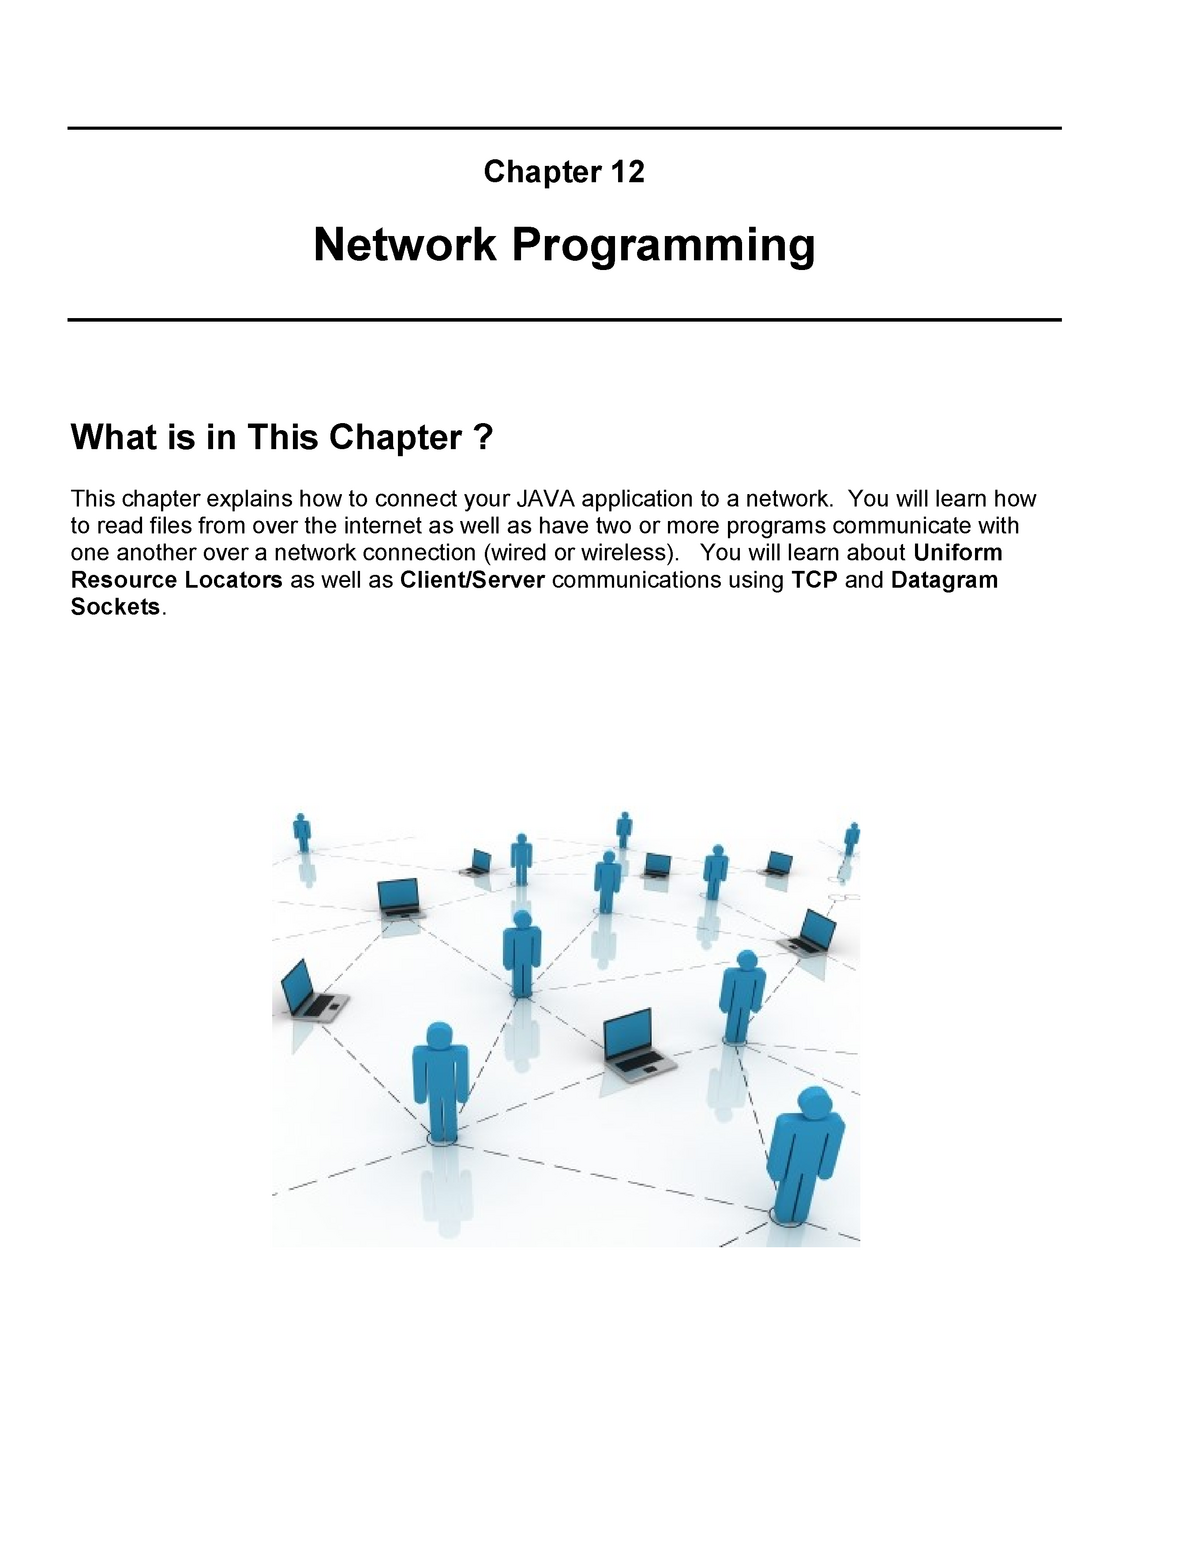 java network connect